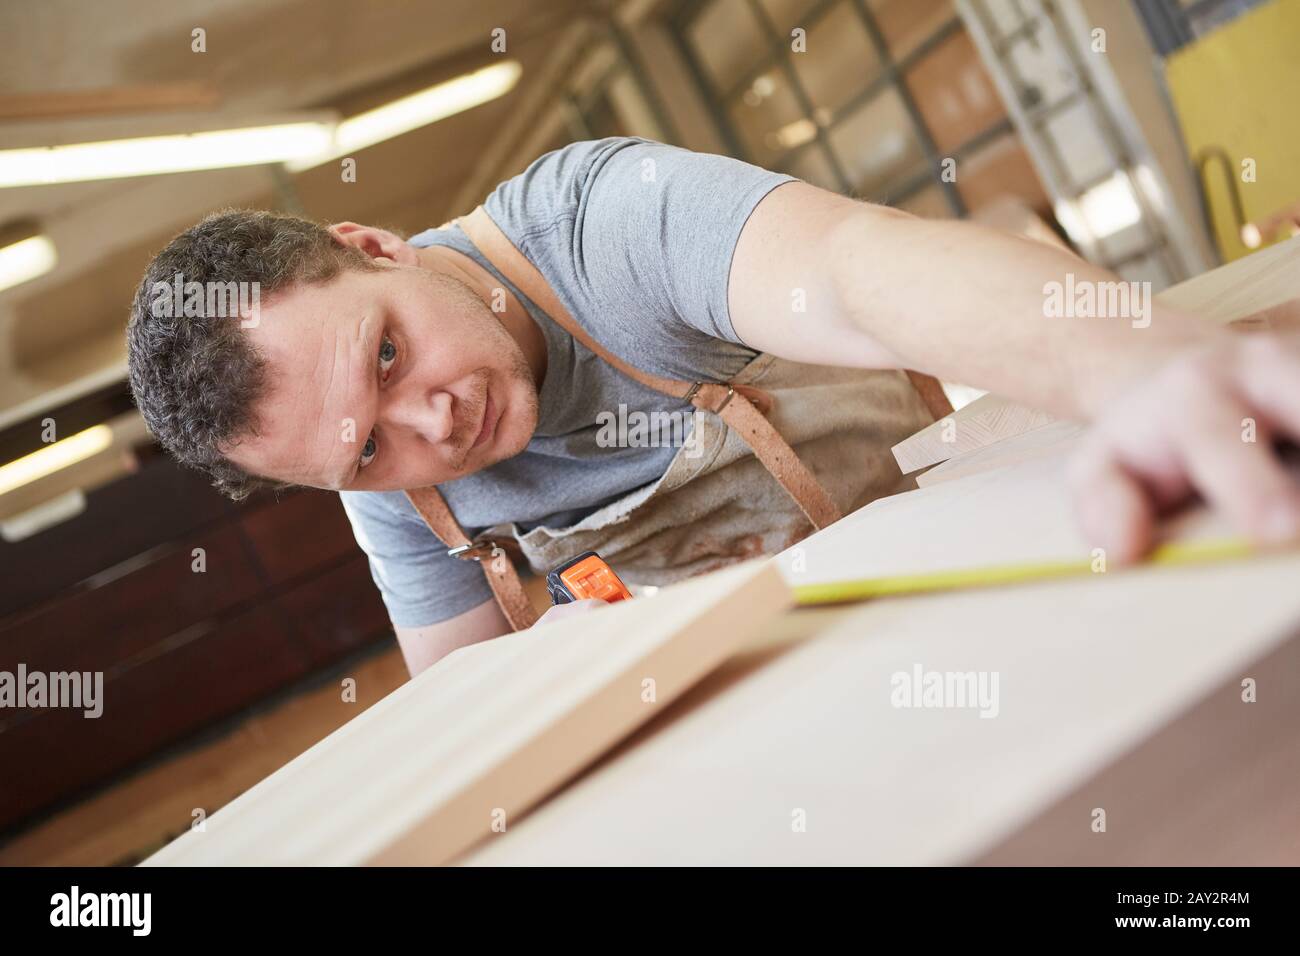 Furniture maker in training for measuring the construction of a wooden shelf Stock Photo